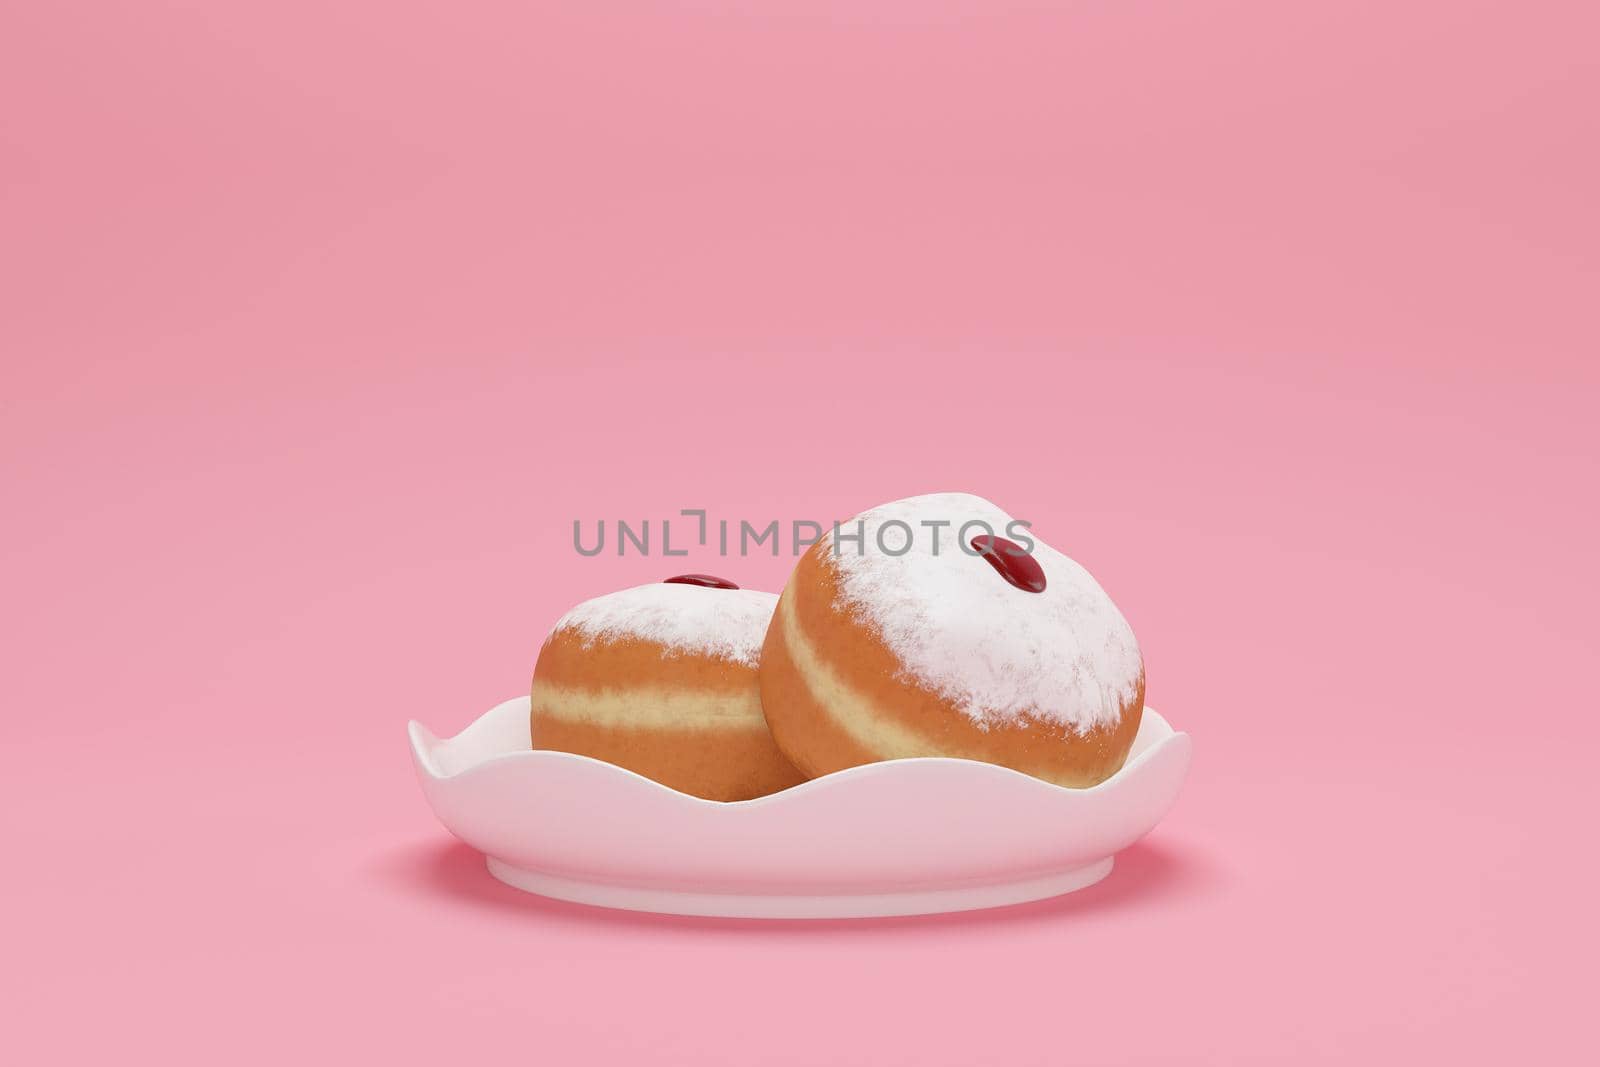 3d rendering Image of Jewish holiday Hanukkah with doughnut on a  pink background.